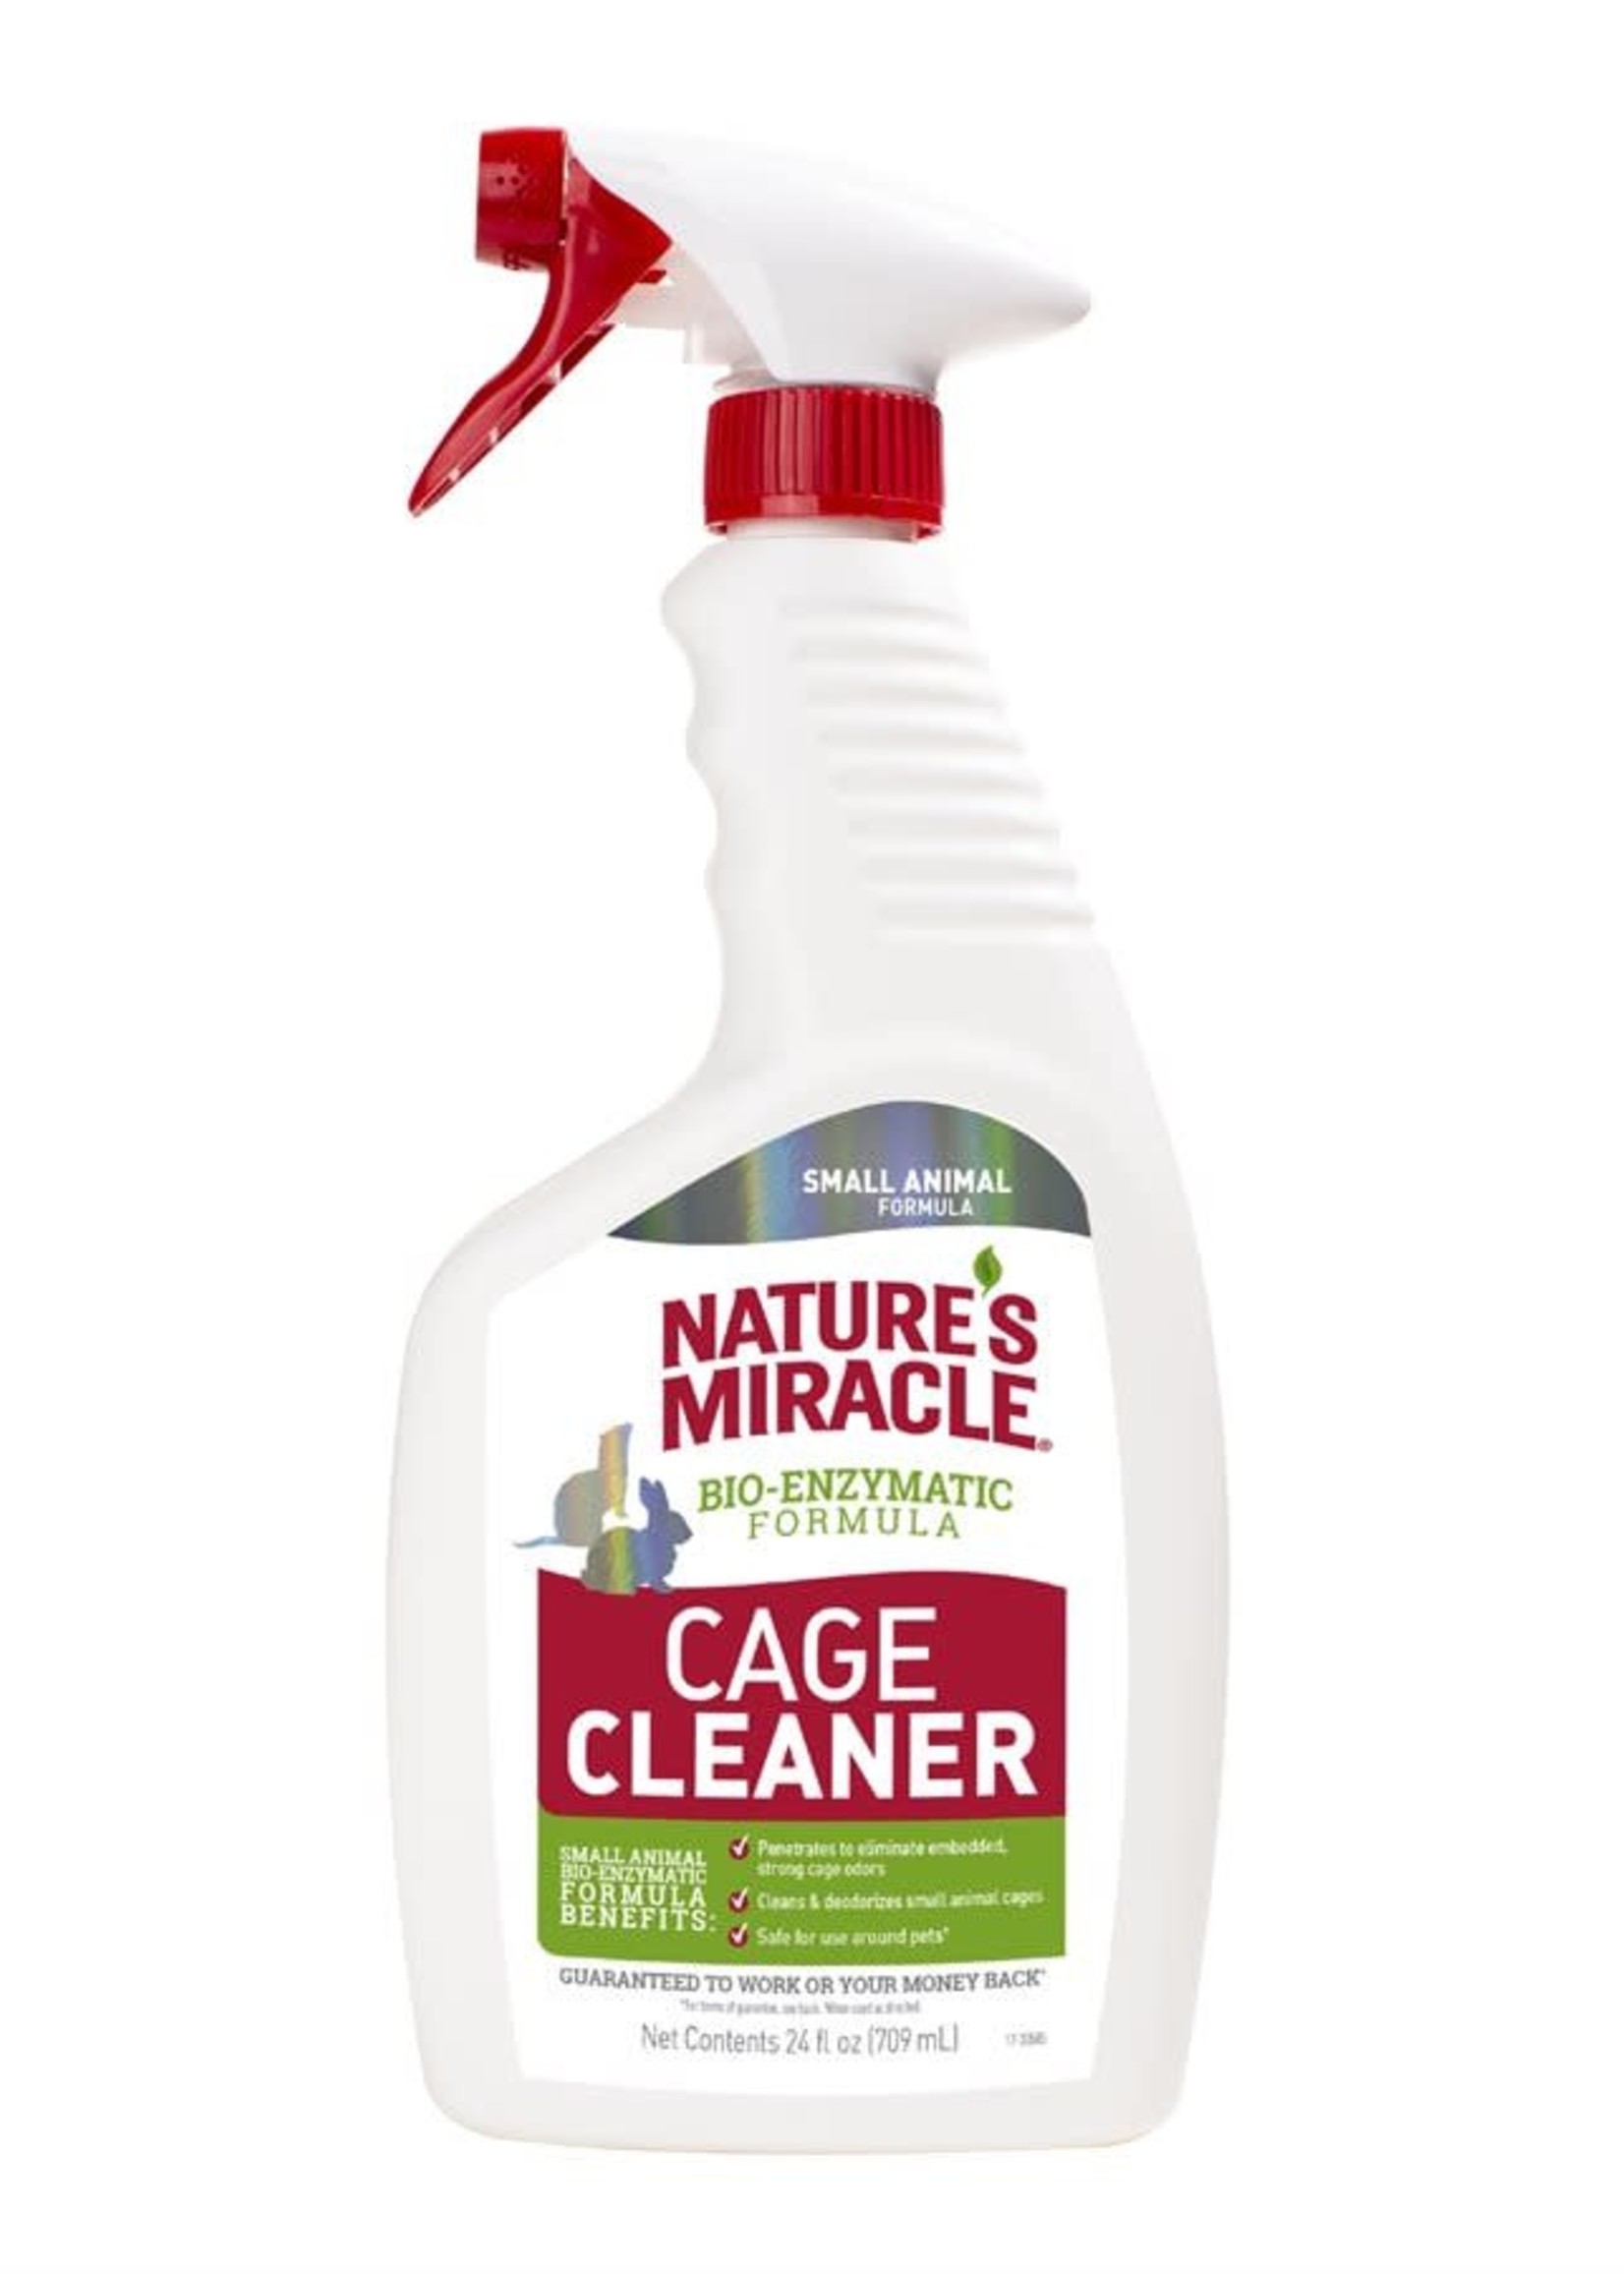 Nature's Miracle Nature's Miracle Small Animal Cage Cleaner 24 oz